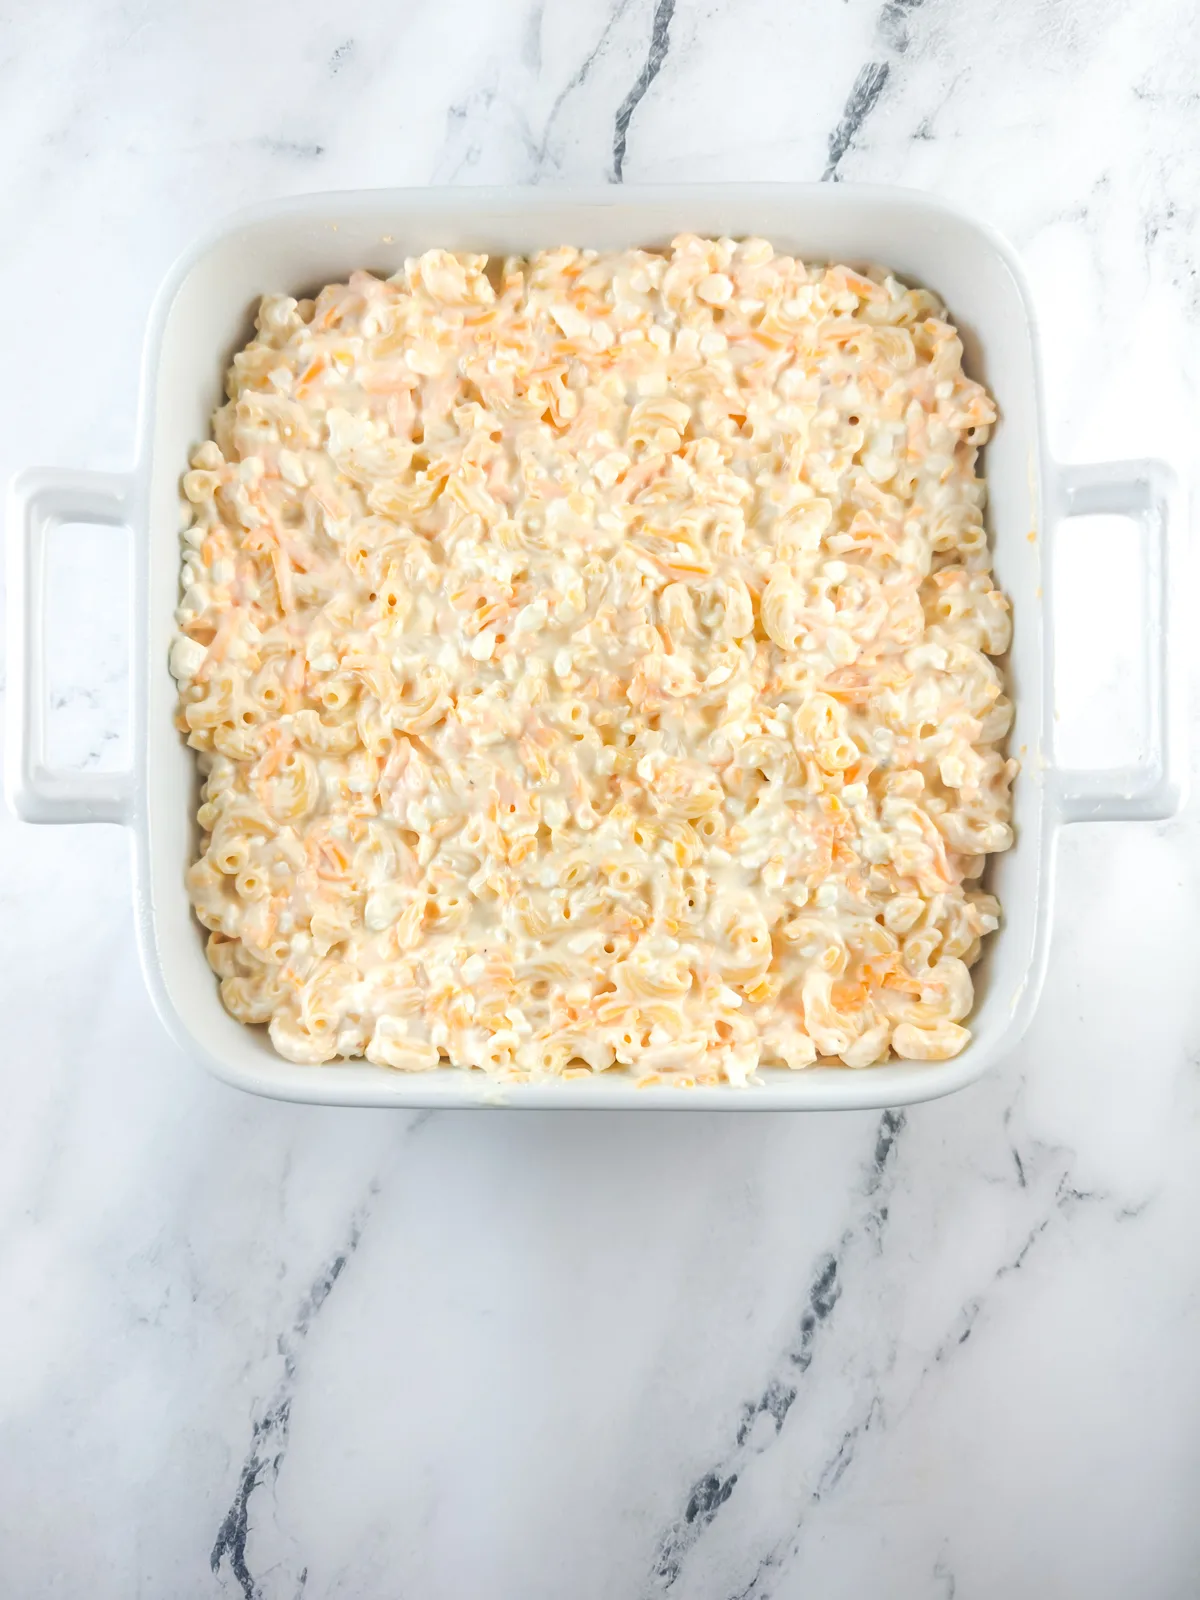 Unbaked macaroni and cheese in a square white baking dish.